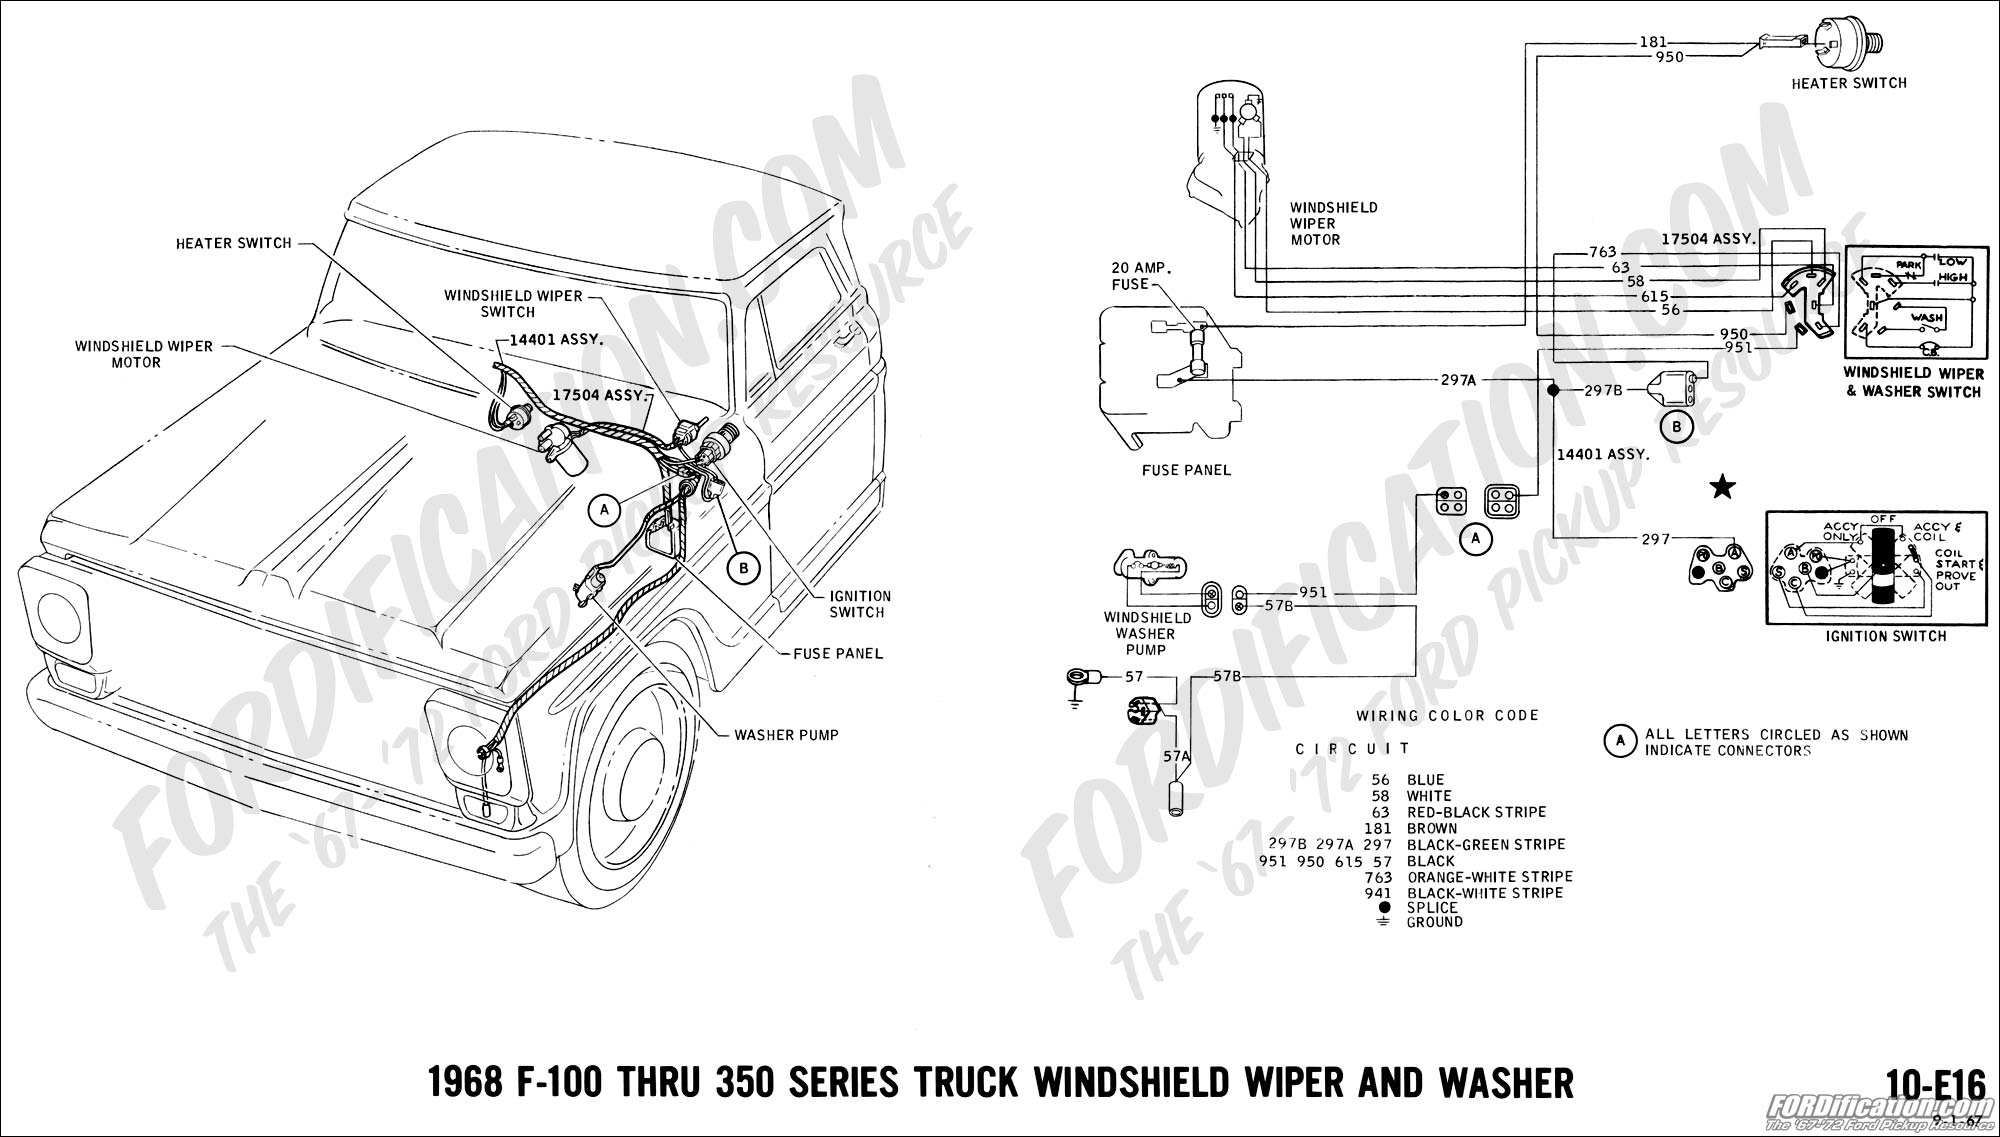 67 F100 Fuse Box | Wiring Library - Mercury Outboard Wiring Diagram Ignition Switch